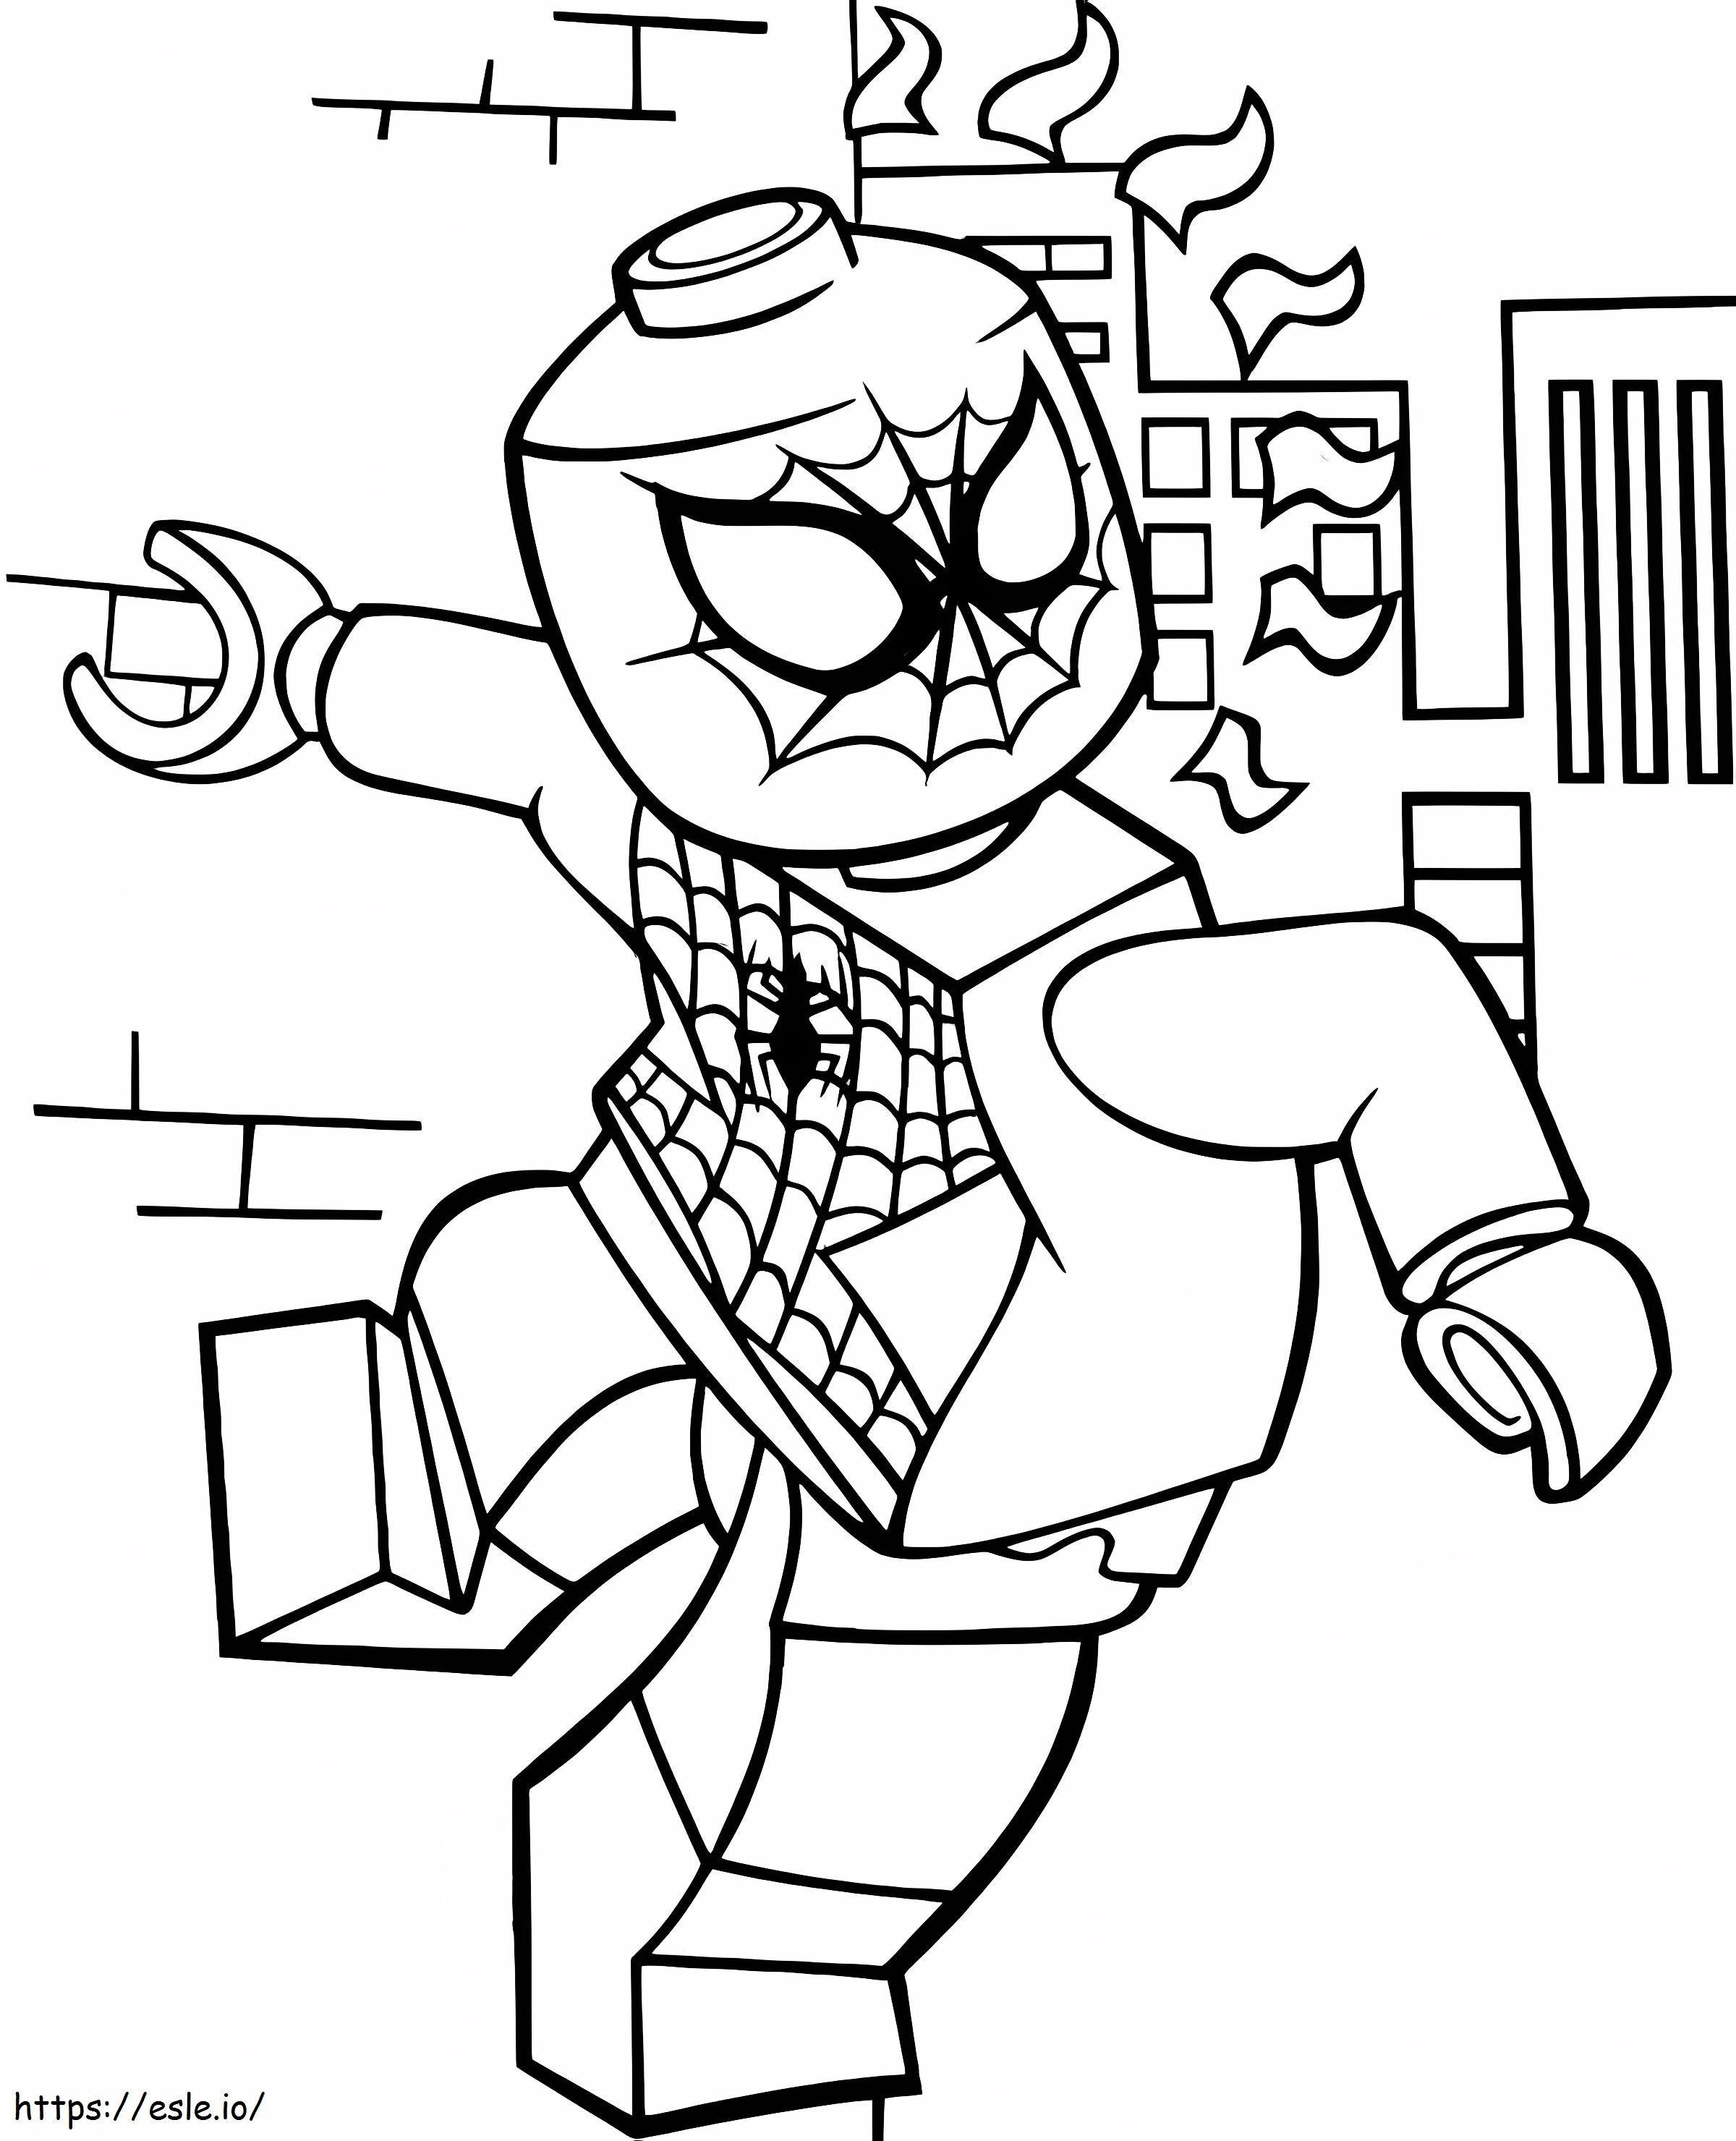 Good Lego Spider Man coloring page